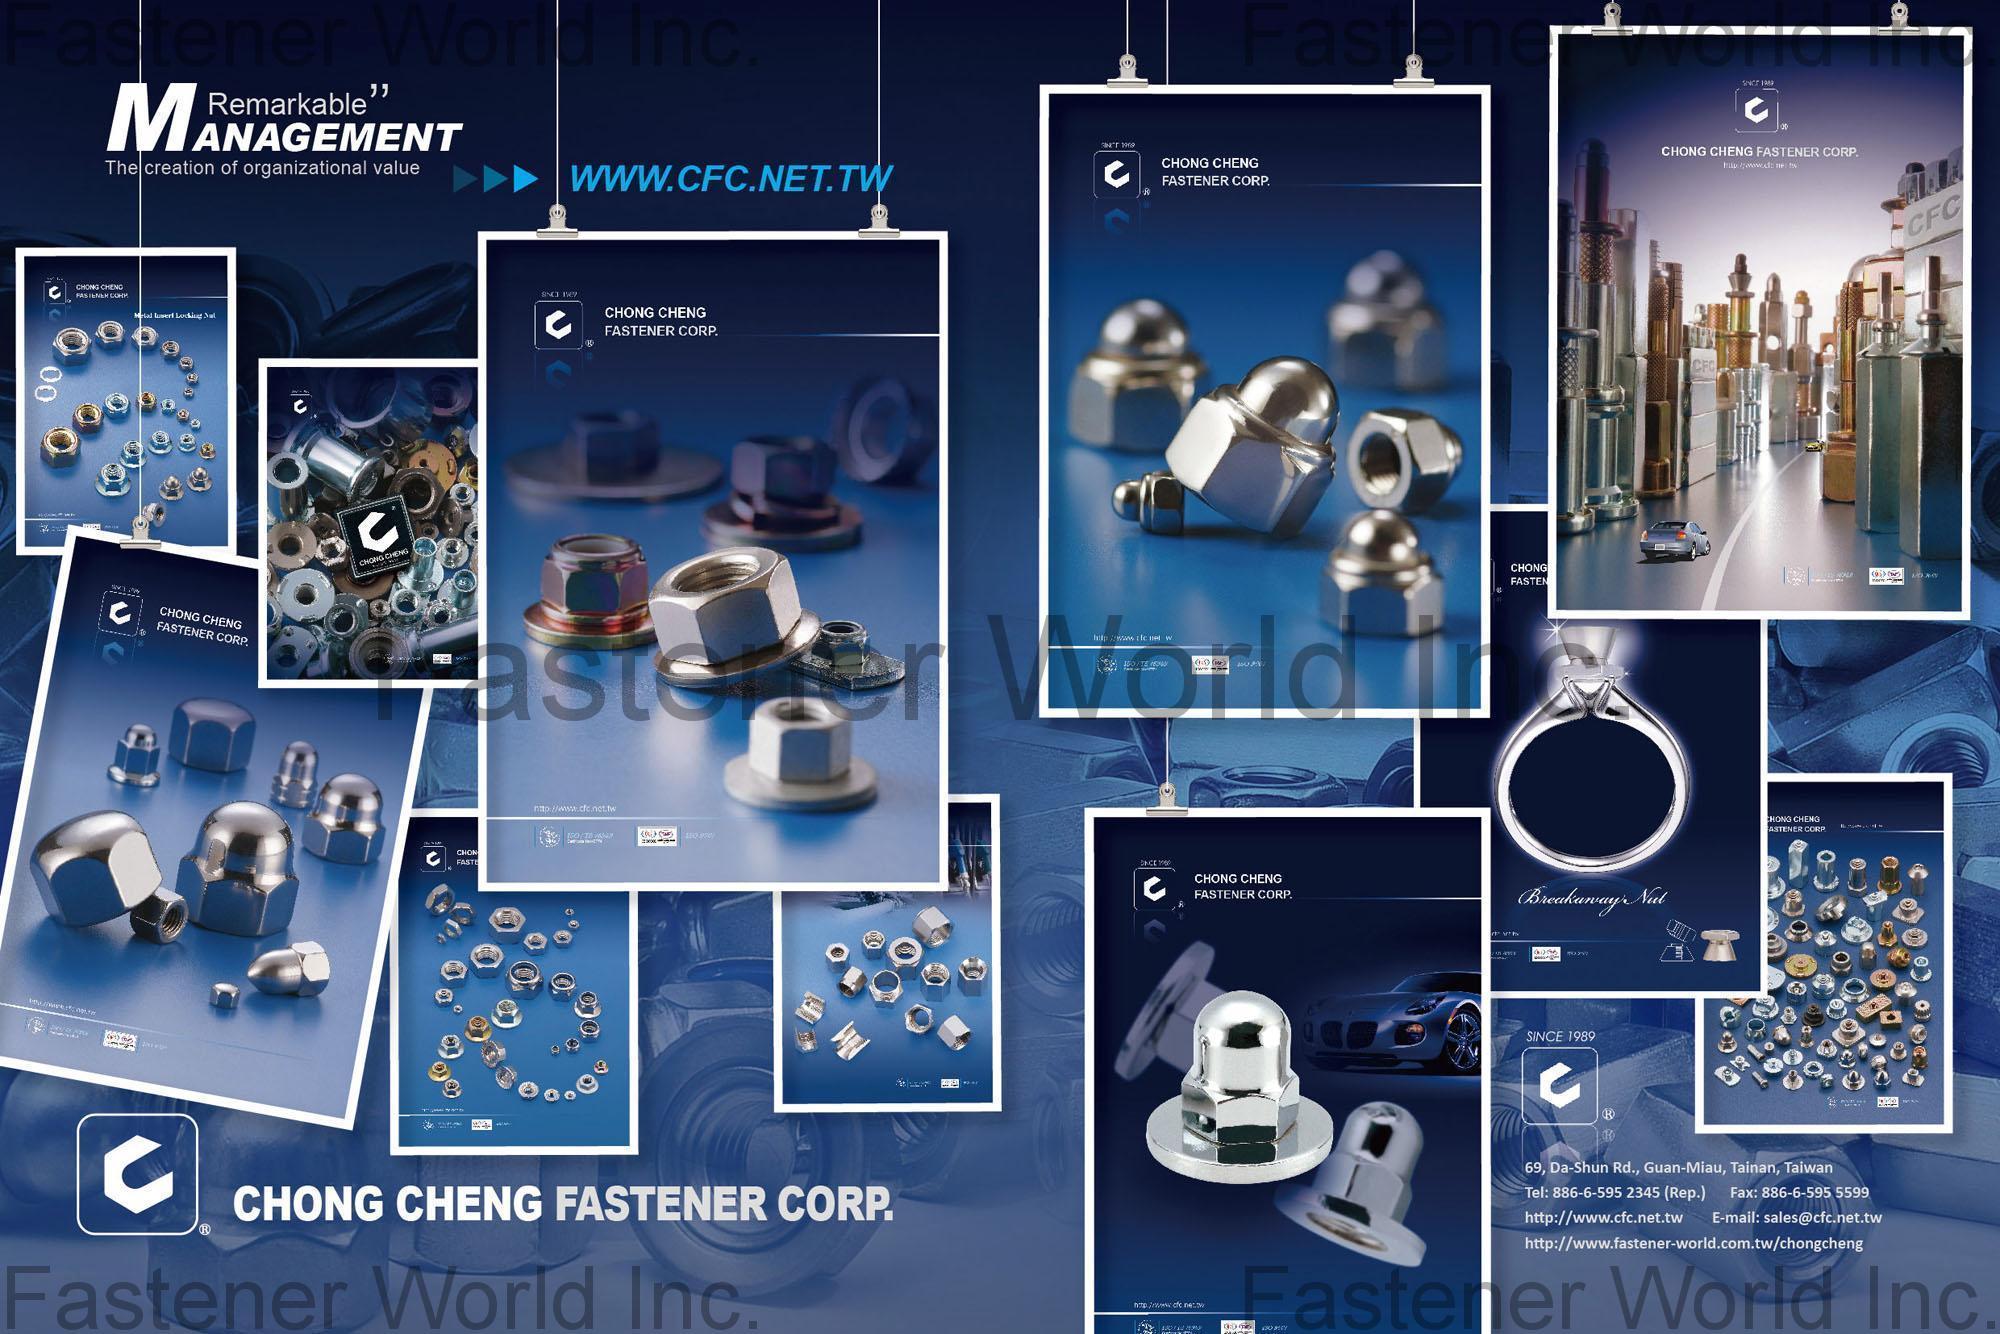 CHONG CHENG FASTENER CORP. (CFC) , Hex Nut with Flat & Conical Washer, Flange Nylon Insert Lock Nut, HEX NUT WITH SPECIAL WASHER, CONICAL SPRING WASHER NUT, CONICAL WASHER NUT, NYLON INSERT NUT WITH WASHER, SPECIAL CONICAL WASHER NUT, DIN 1587, DIN934, DIN982, DIN 985, DIN 986, DIN 917, DIN 562, DIN557, DIN929, DIN928, DIN439, DIN 6923, DIN 6926, DIN6334, DIN980, DIN980V All Metal prevailing Torque, DIN6330, HEX FLANGE CAP NUT, FIN HEX NUT, HEX NYLON INSERT LOCK NUT (NE/NM), HEX THIN NYLON INSERT LOCK NUT (NTE/NTM), HEX FLANGE NUT (SERRATION/ WITHOUT SERRATION), HEX KEPS NUT, ACORN CAP NUT, SQUARE NUT, HEX SLOTTED NUT, HEX JAM  , Acorn Nuts